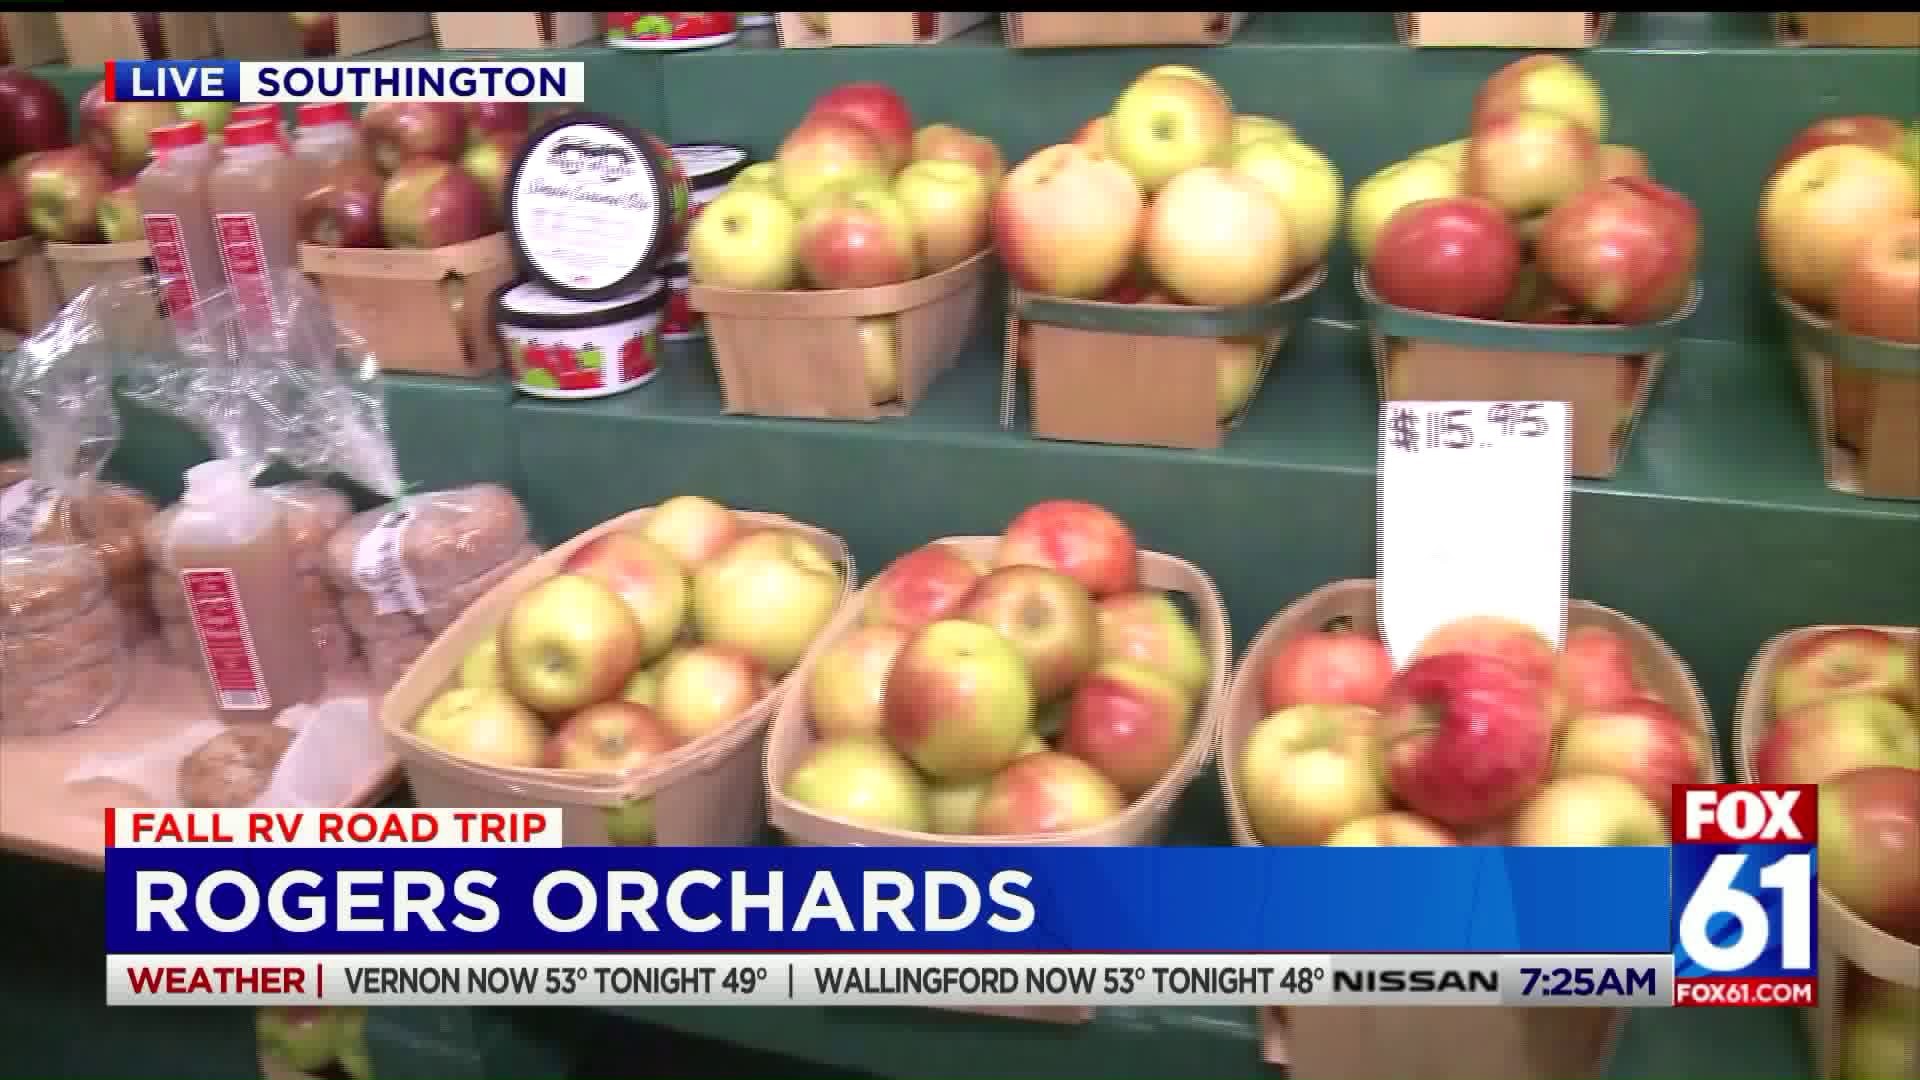 The FOX61 Fall RV Road Trip stops at Rogers Orchards